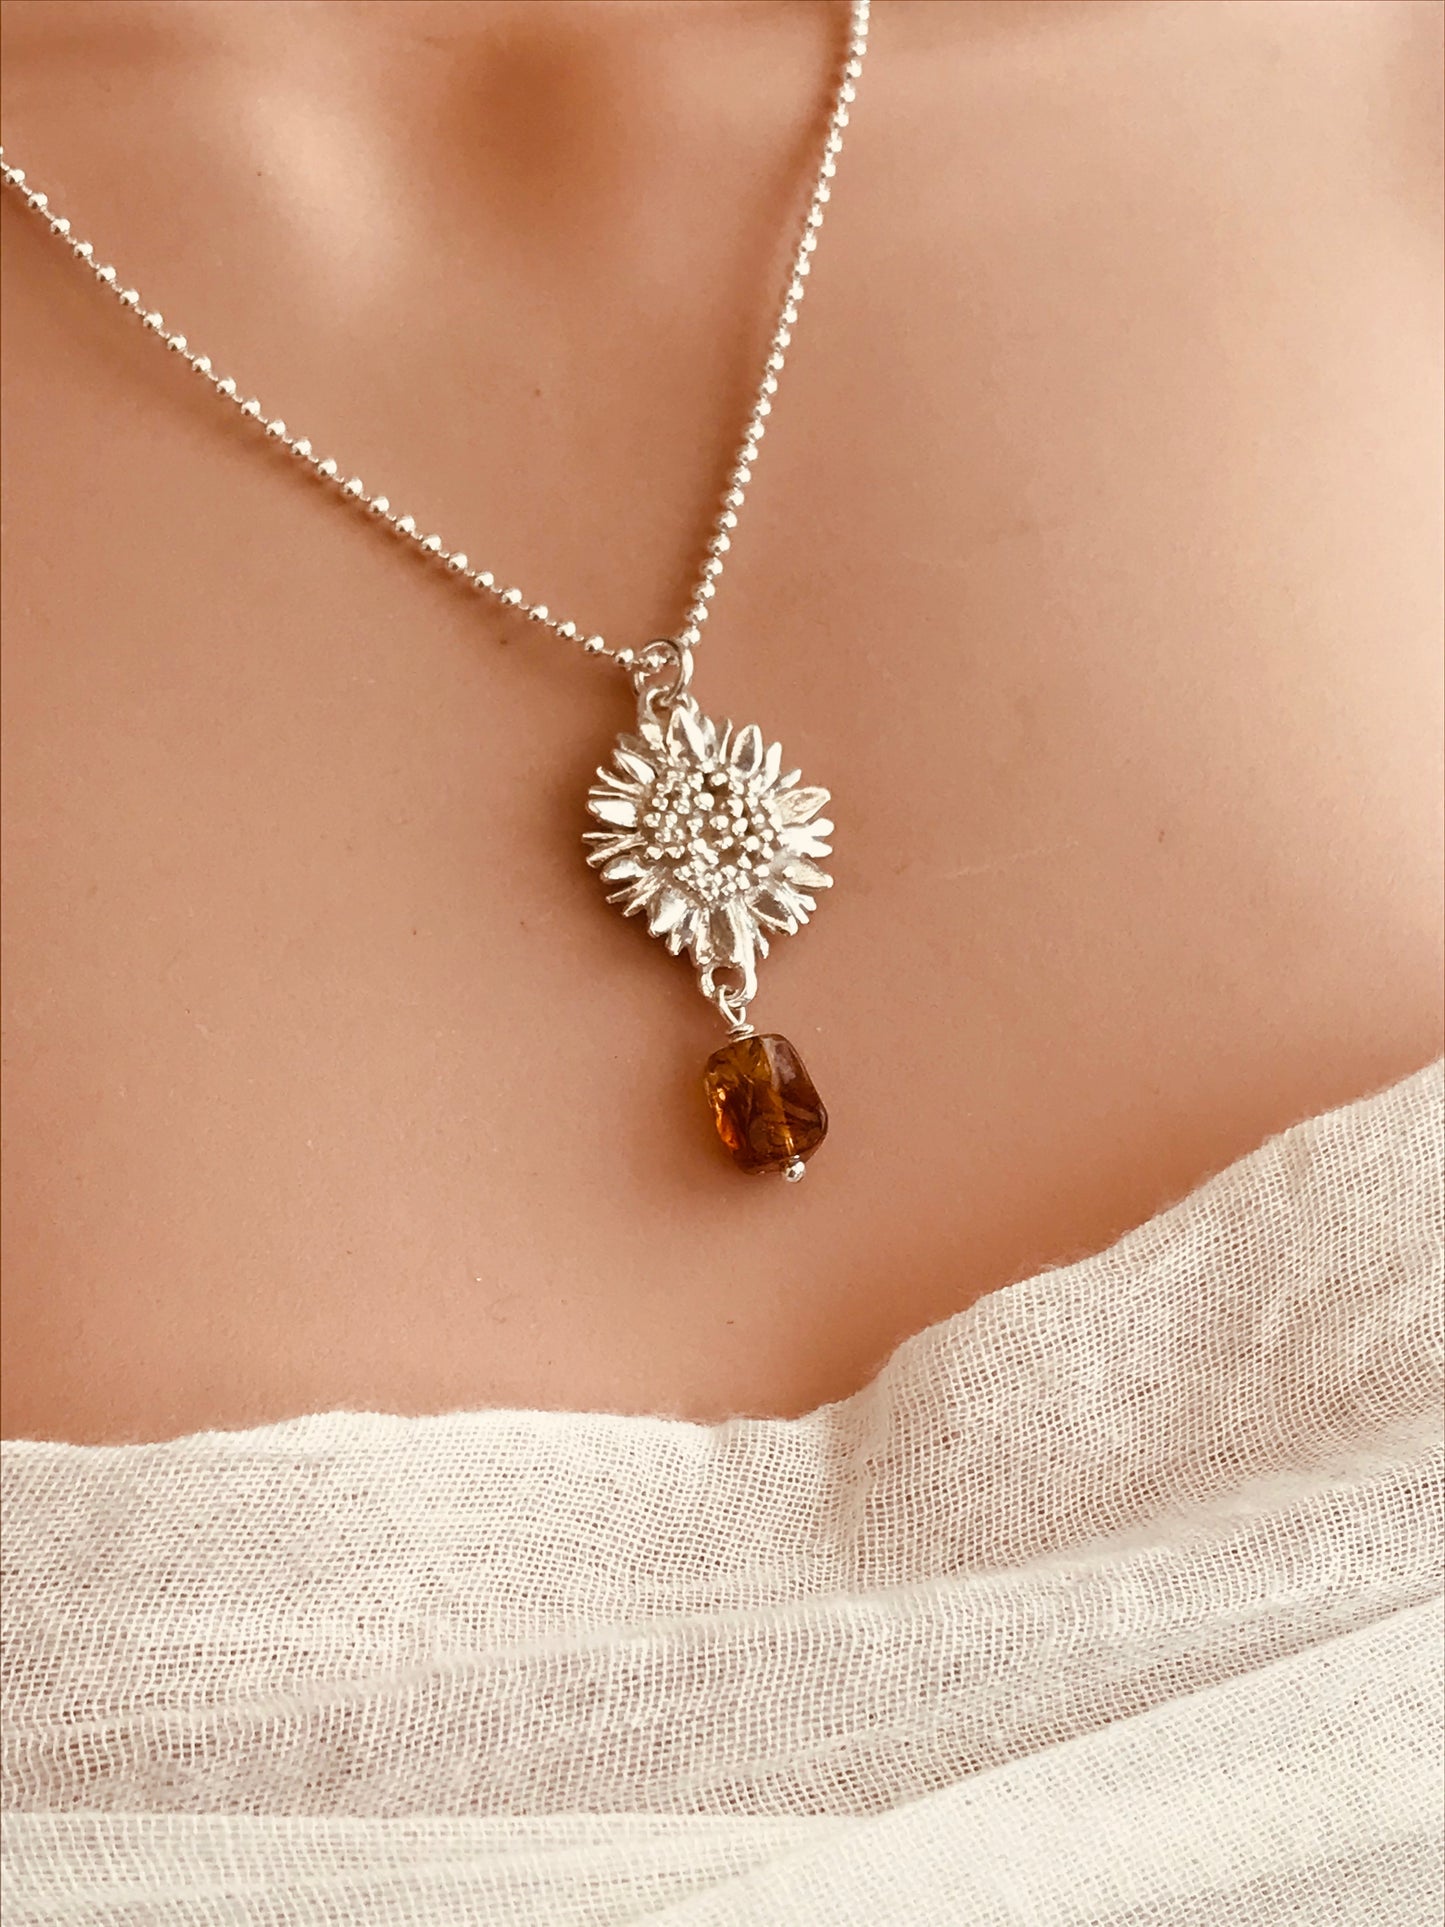 Sunflower necklace with amber bead